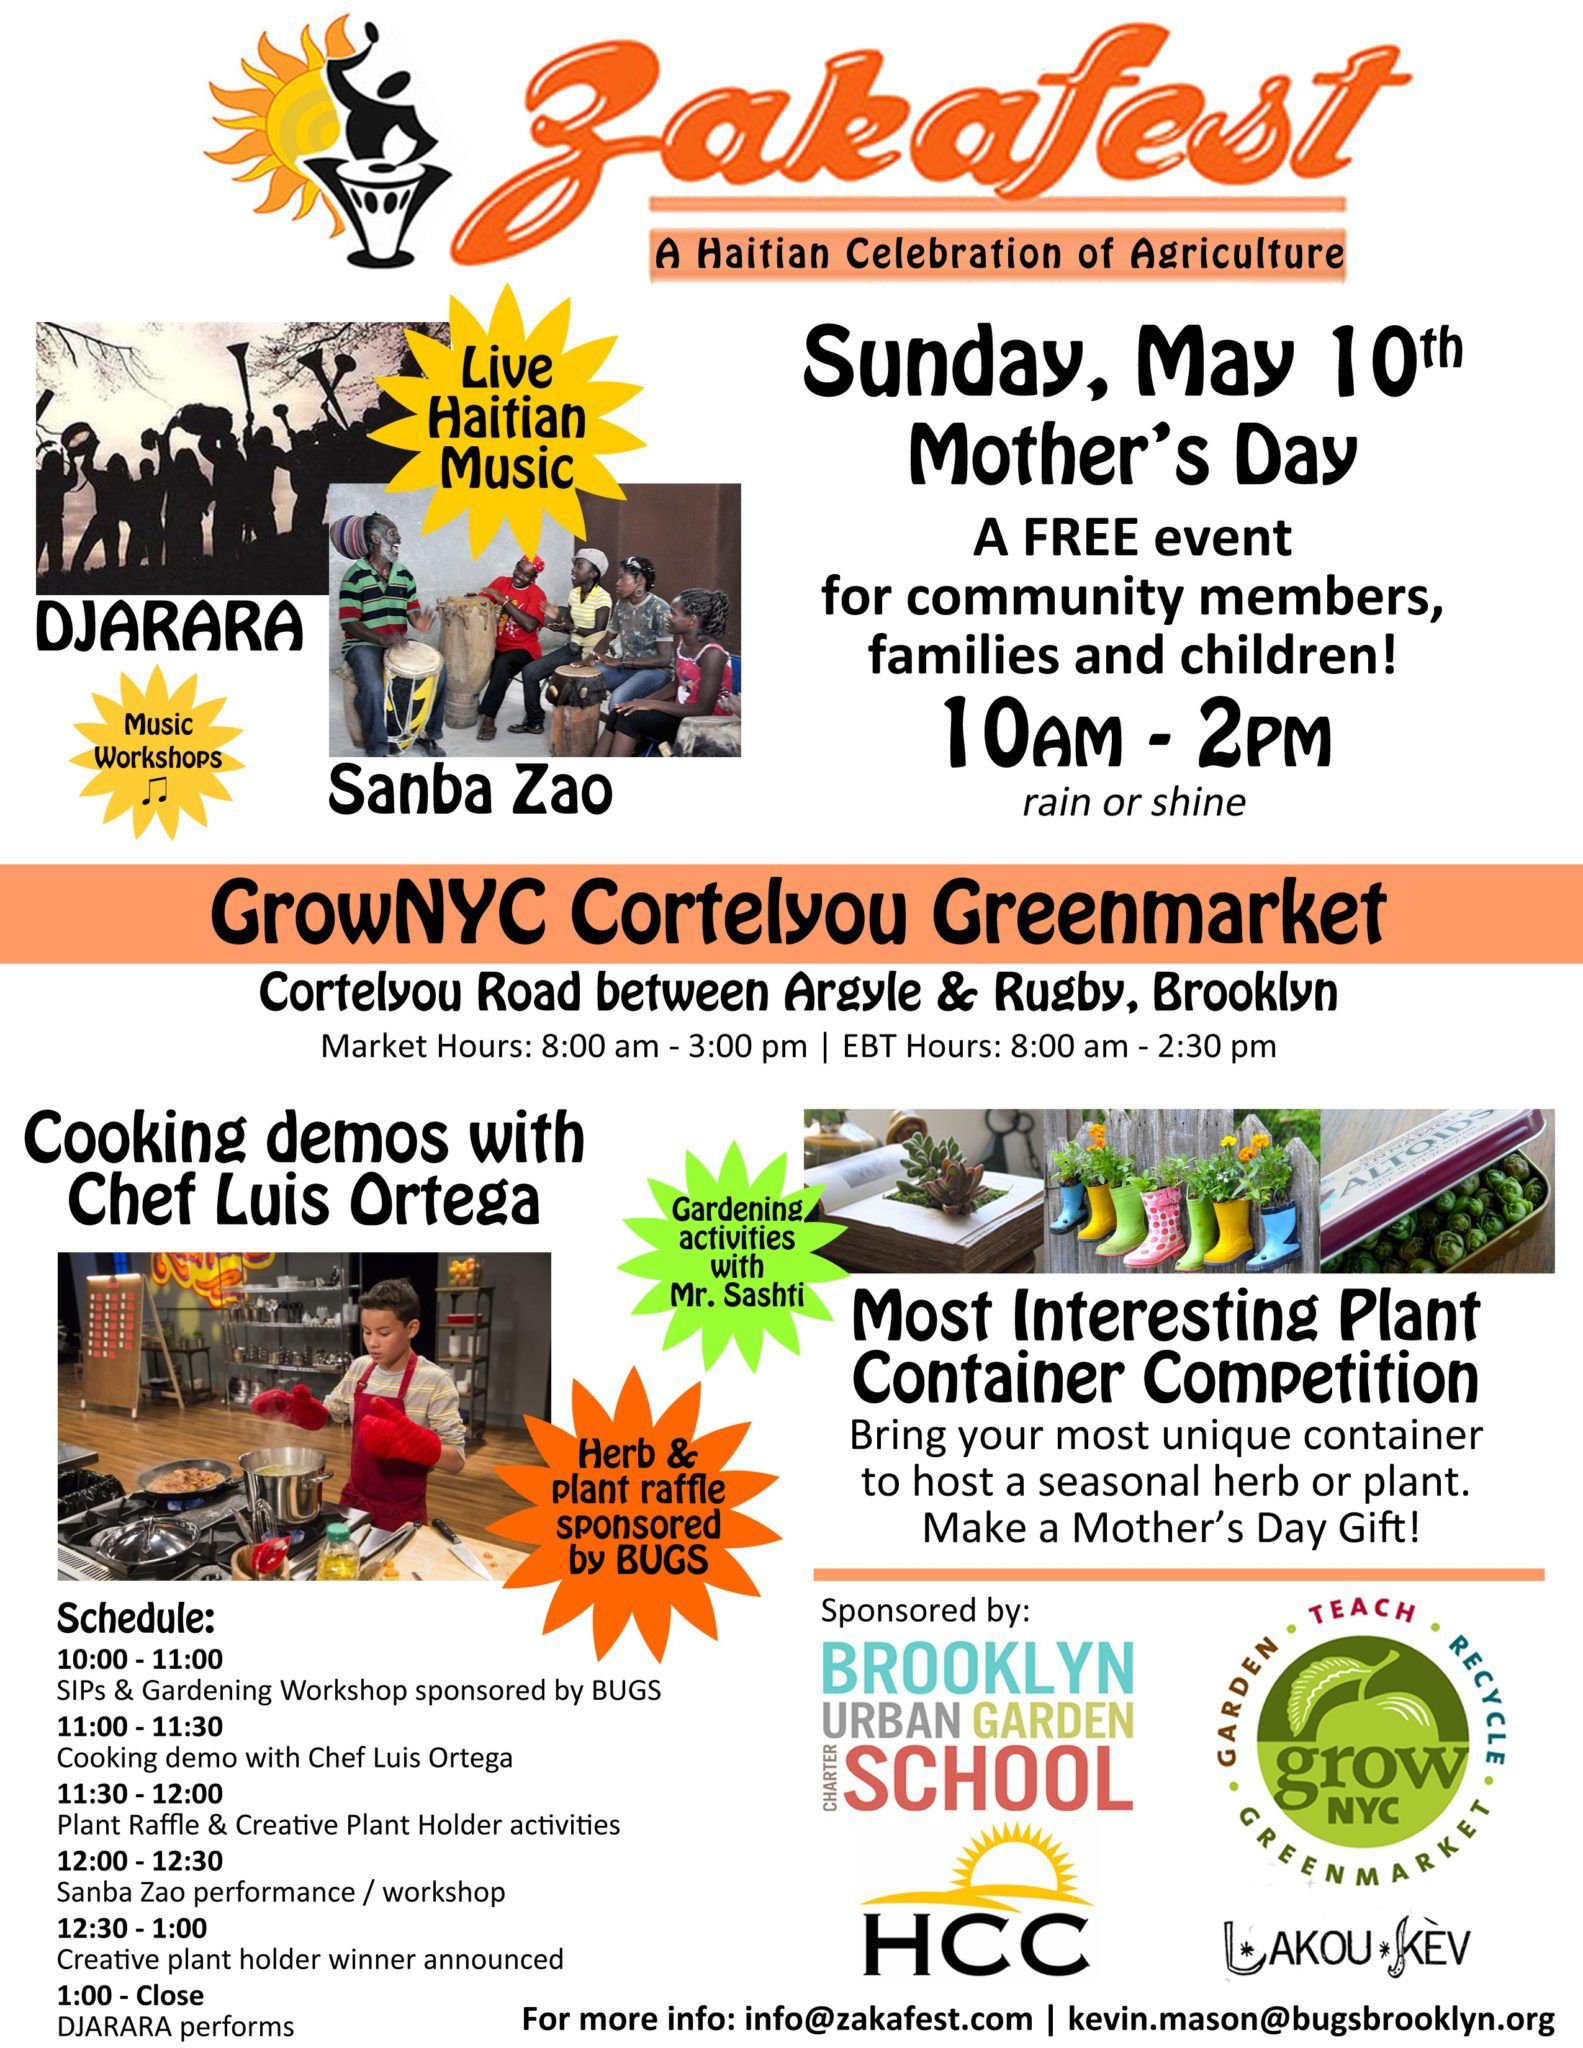 Celebrate Zakafest With Food, Music & More At The Cortelyou Greenmarket